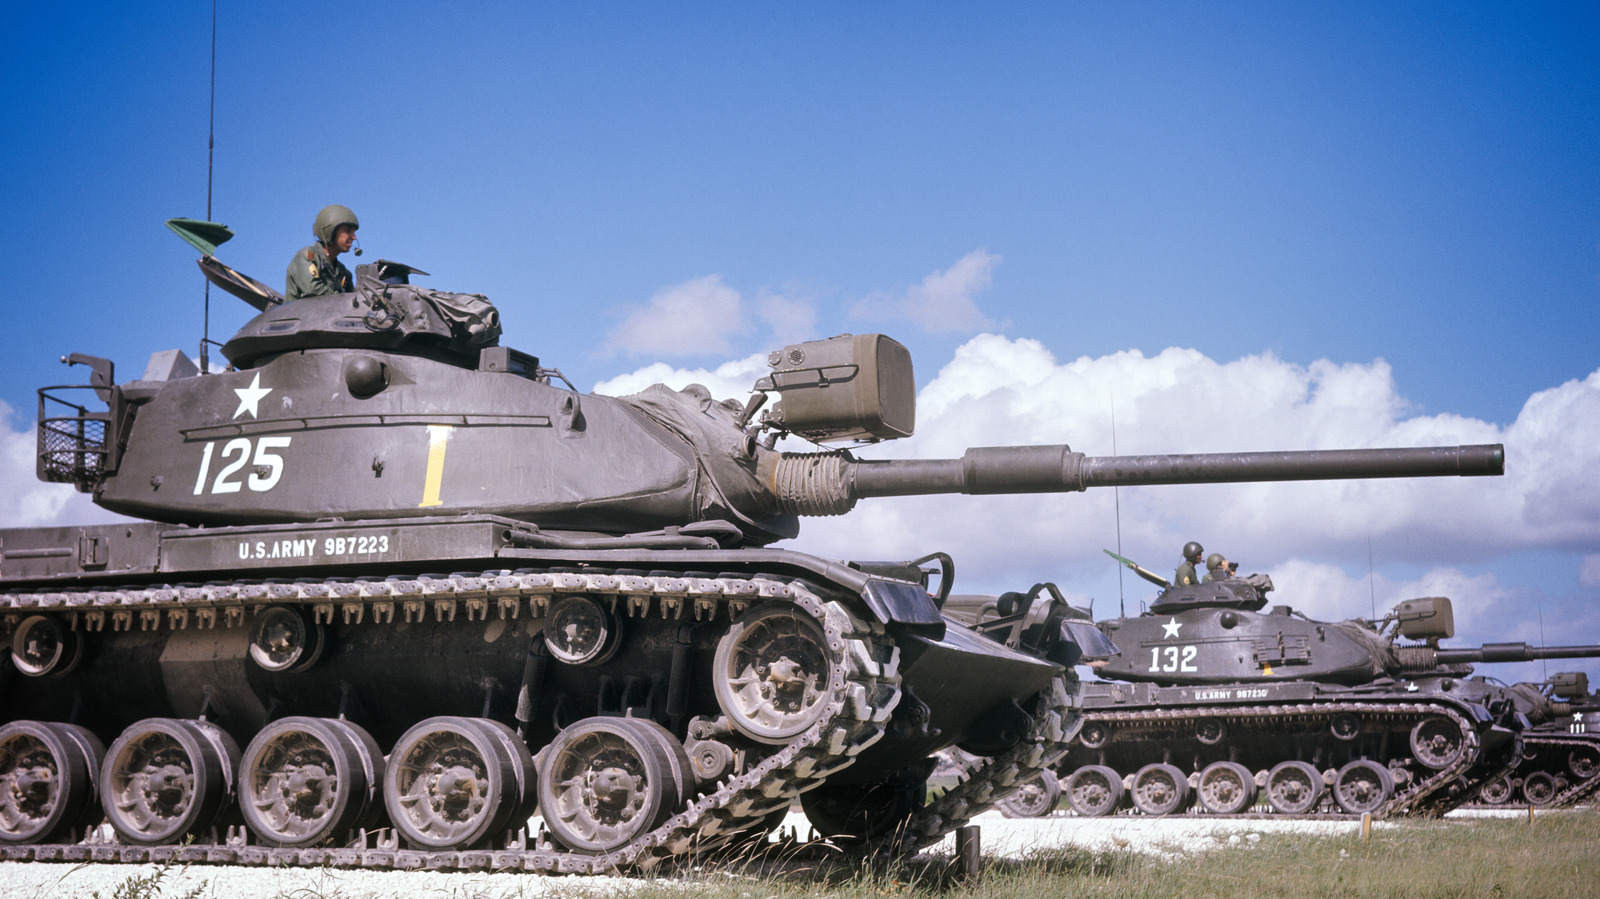 Tanks In The Vietnam War: What Role Did They Play?